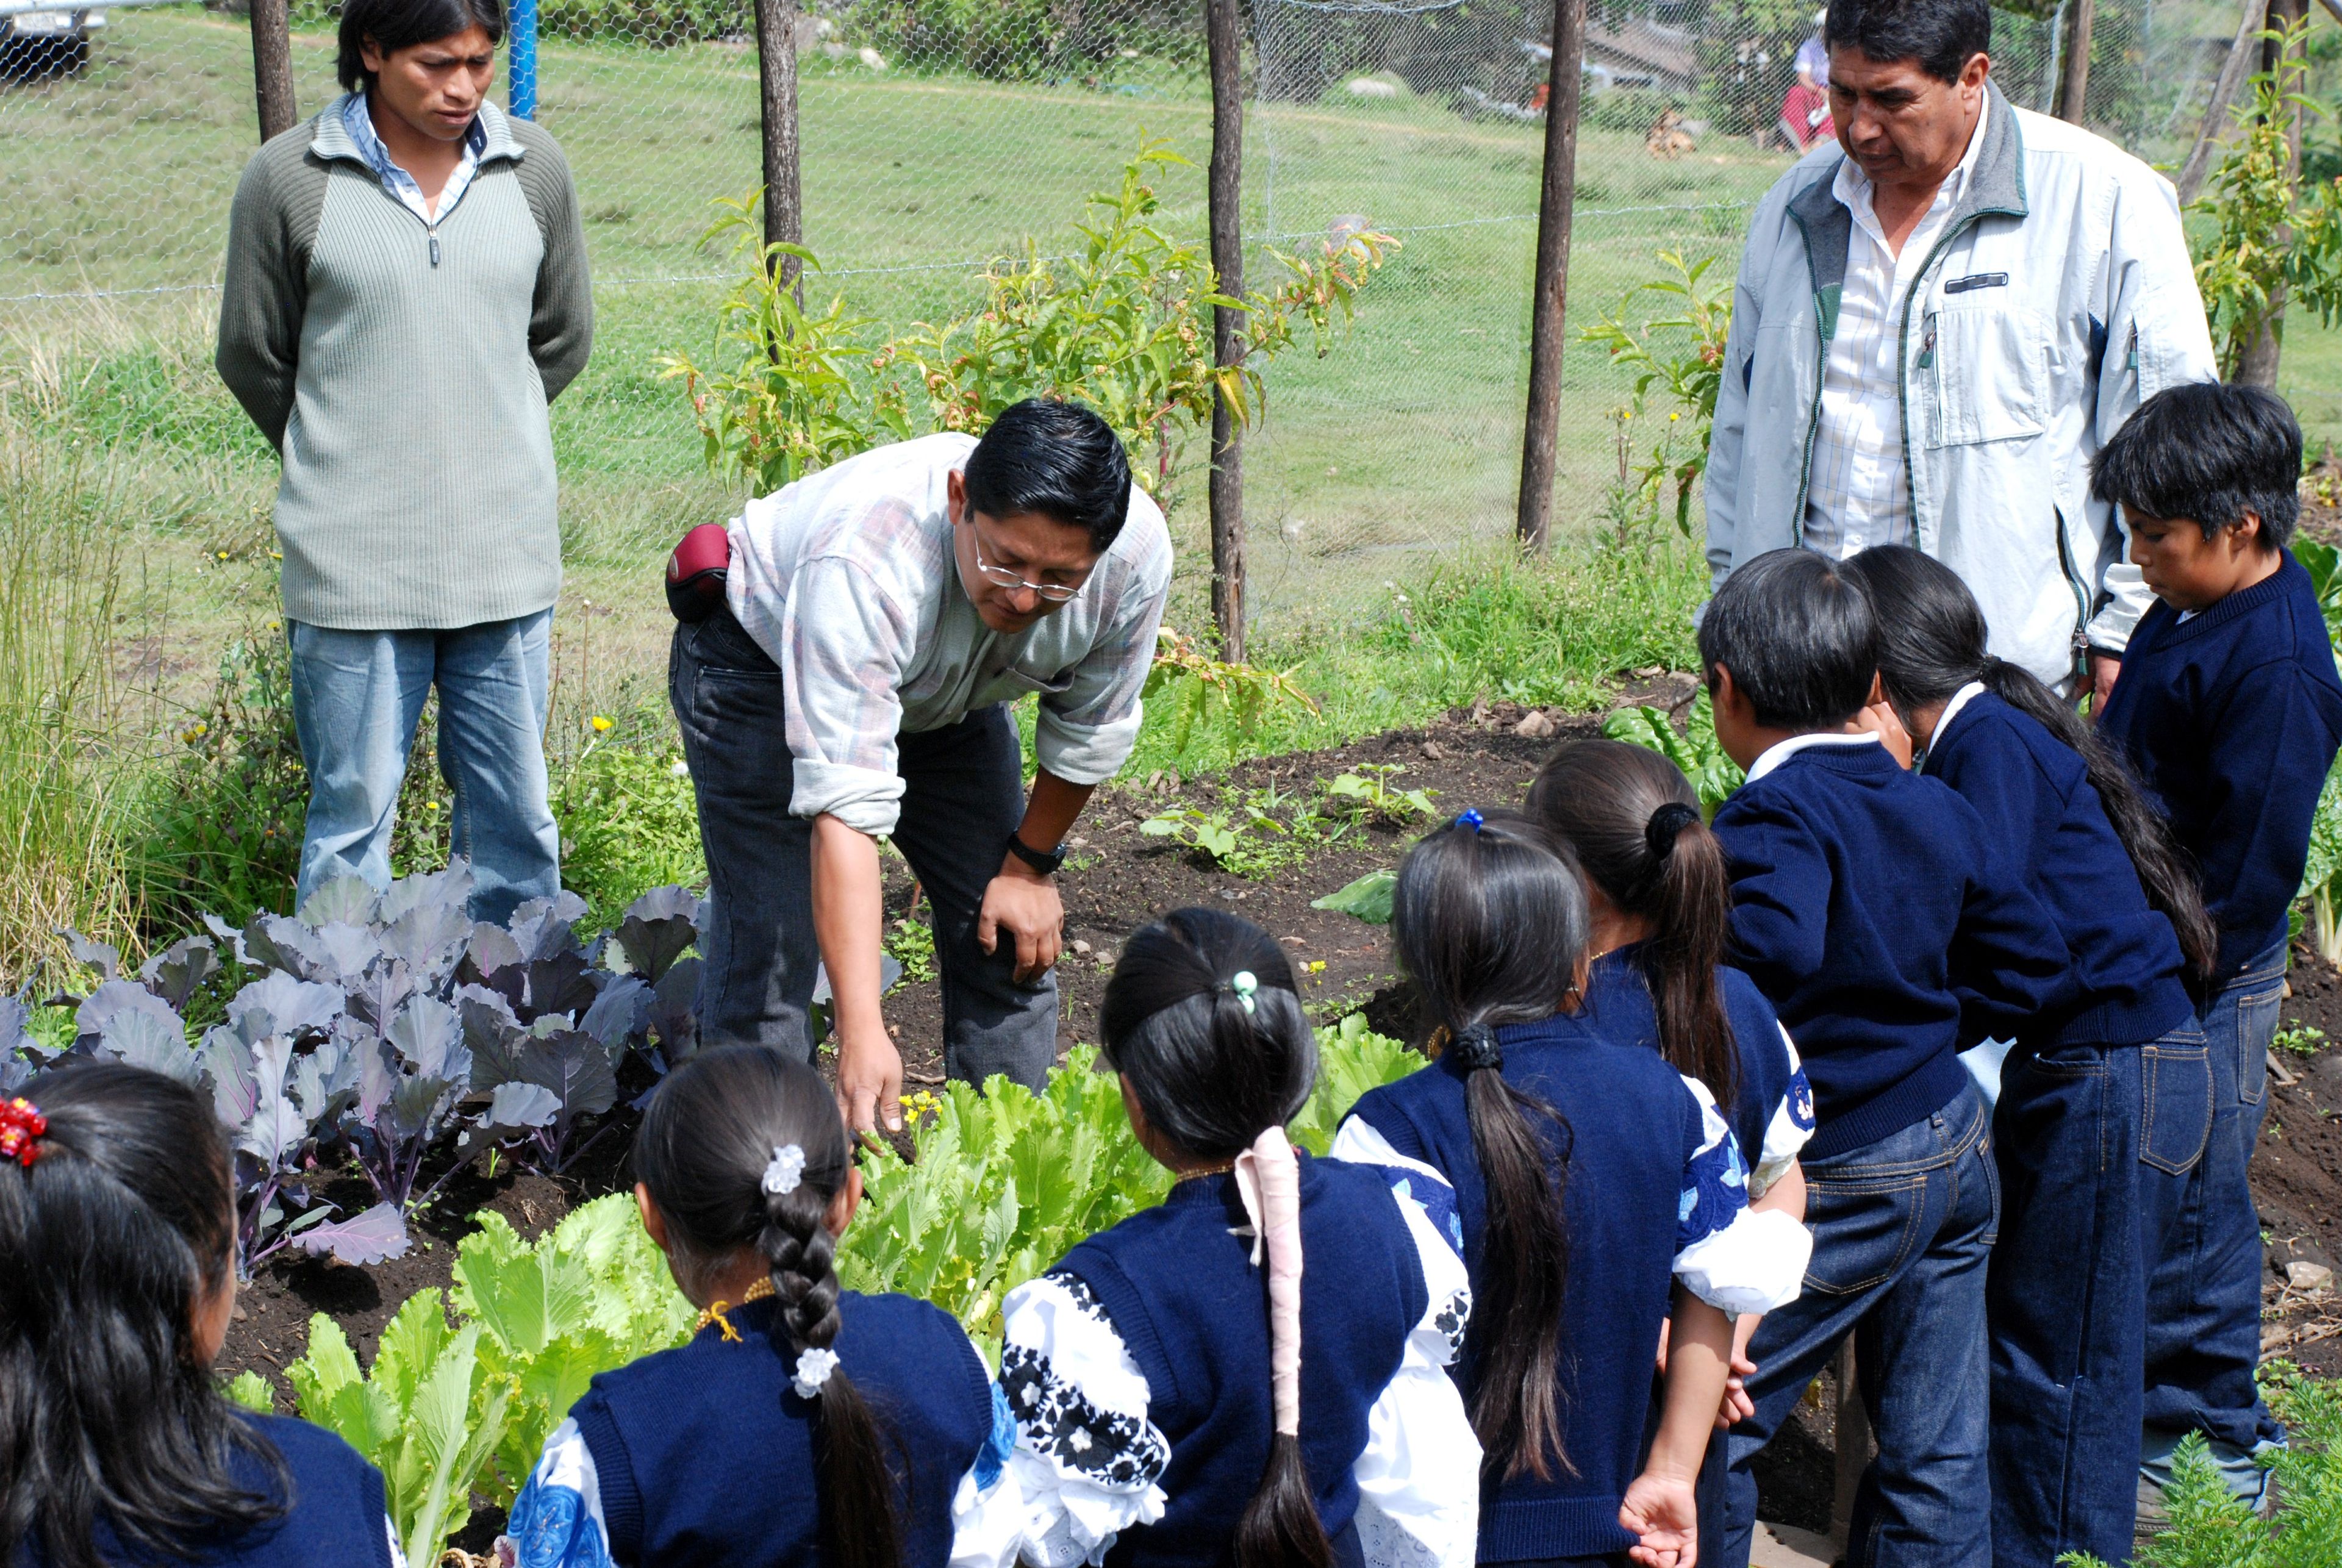 A group of children learn about the plants in a garden.